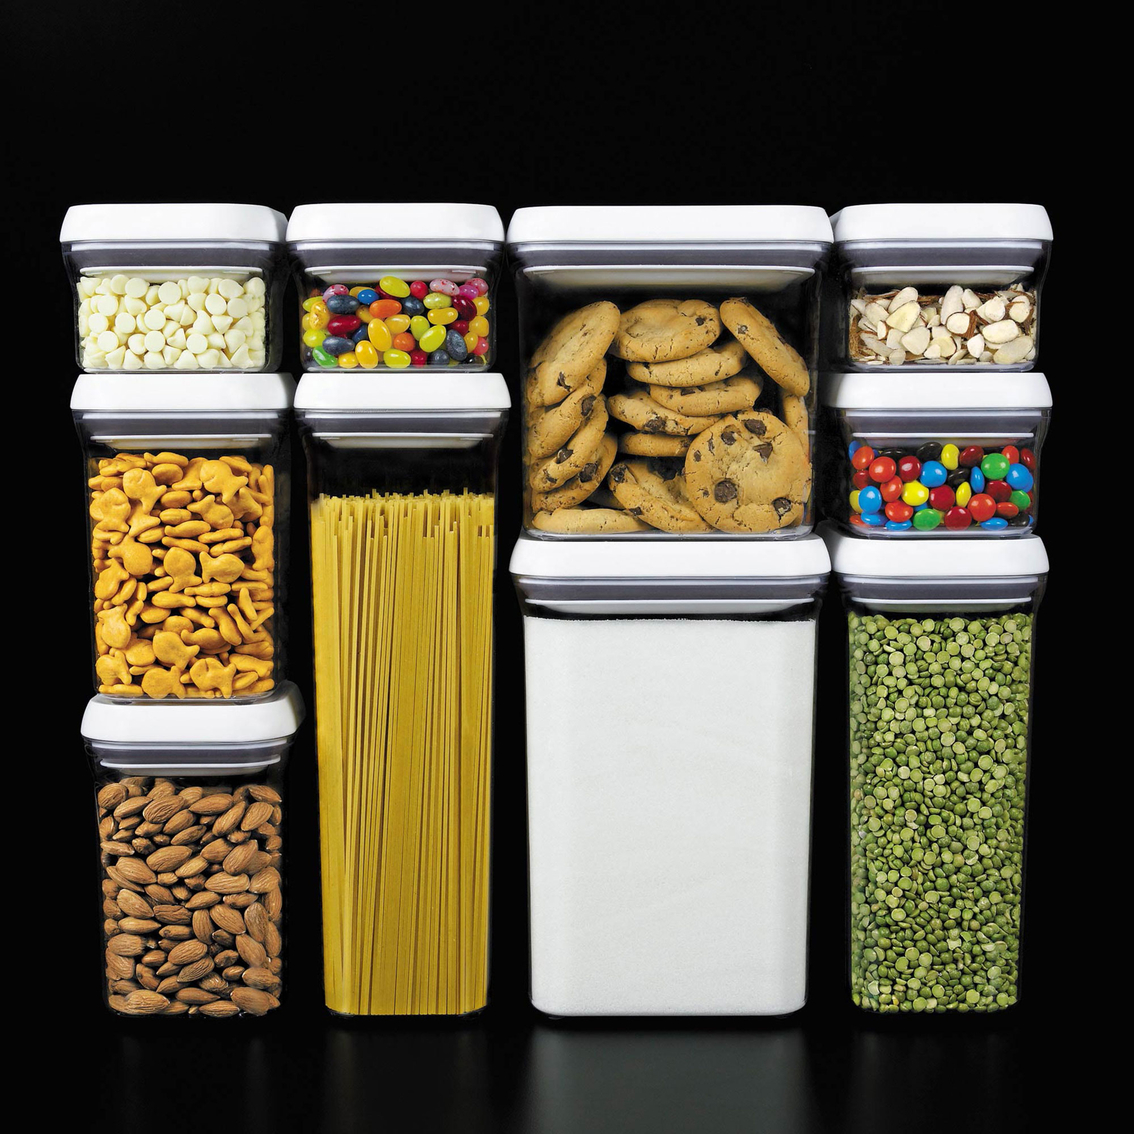 Oxo Good Grips Pop Container Set, 10 Piece